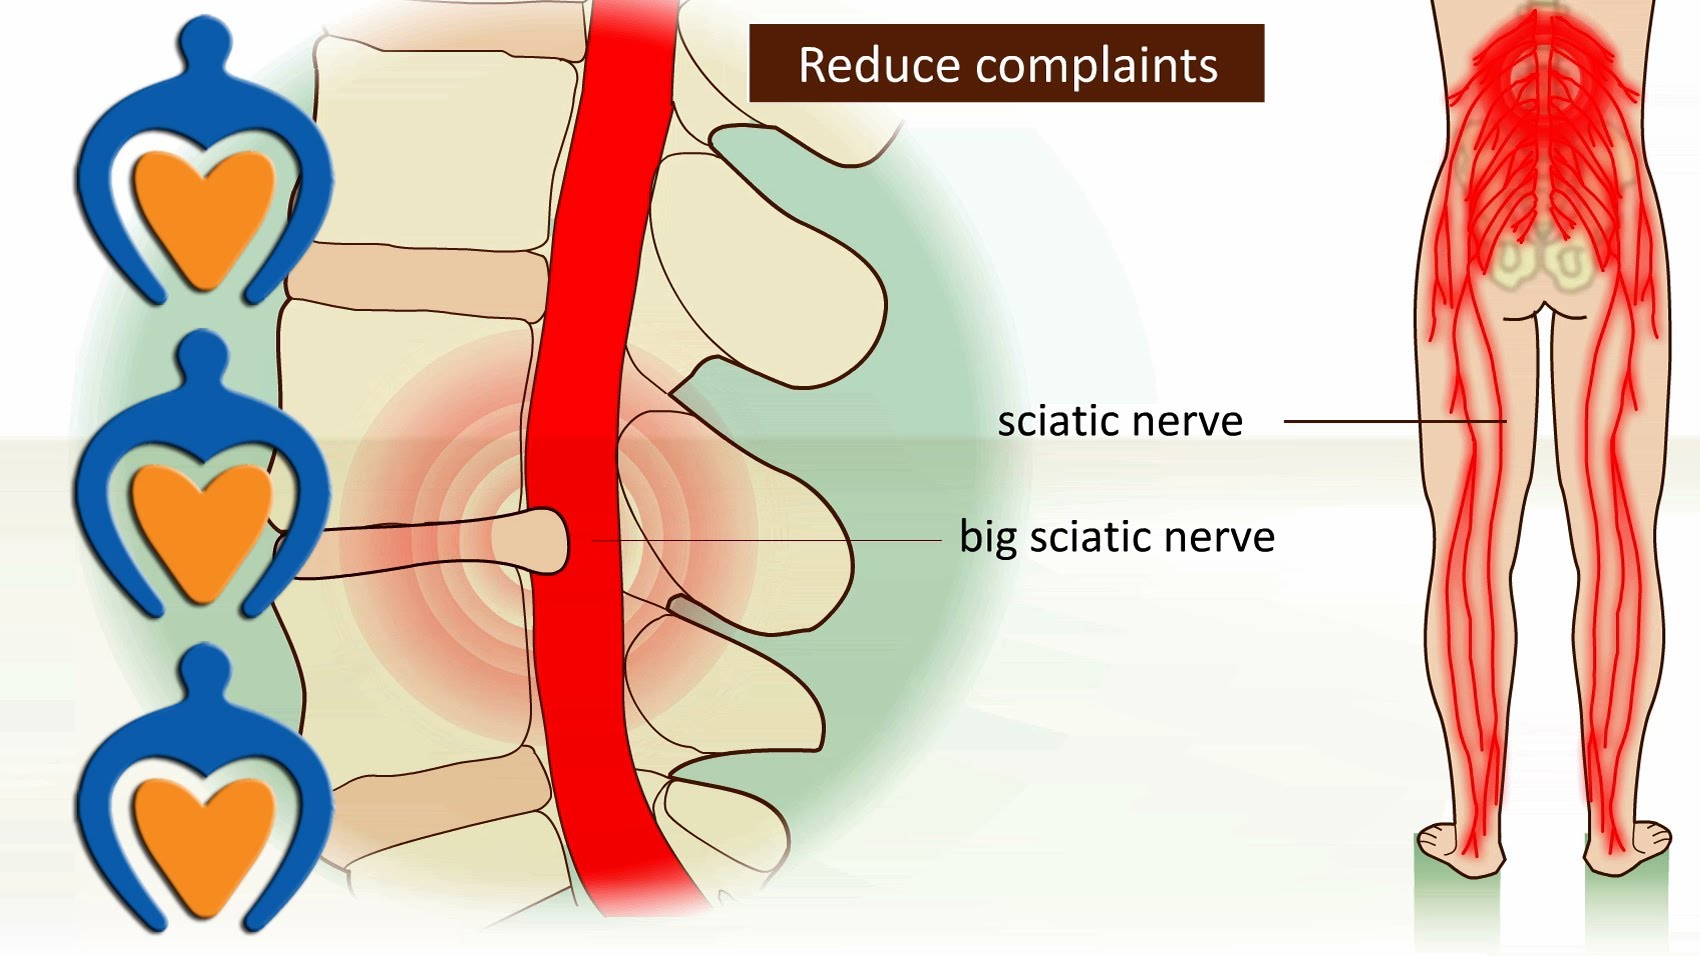 Lower back pain (a.o. sciatica, herniated disk) – It’s causes, symptoms and treatment.